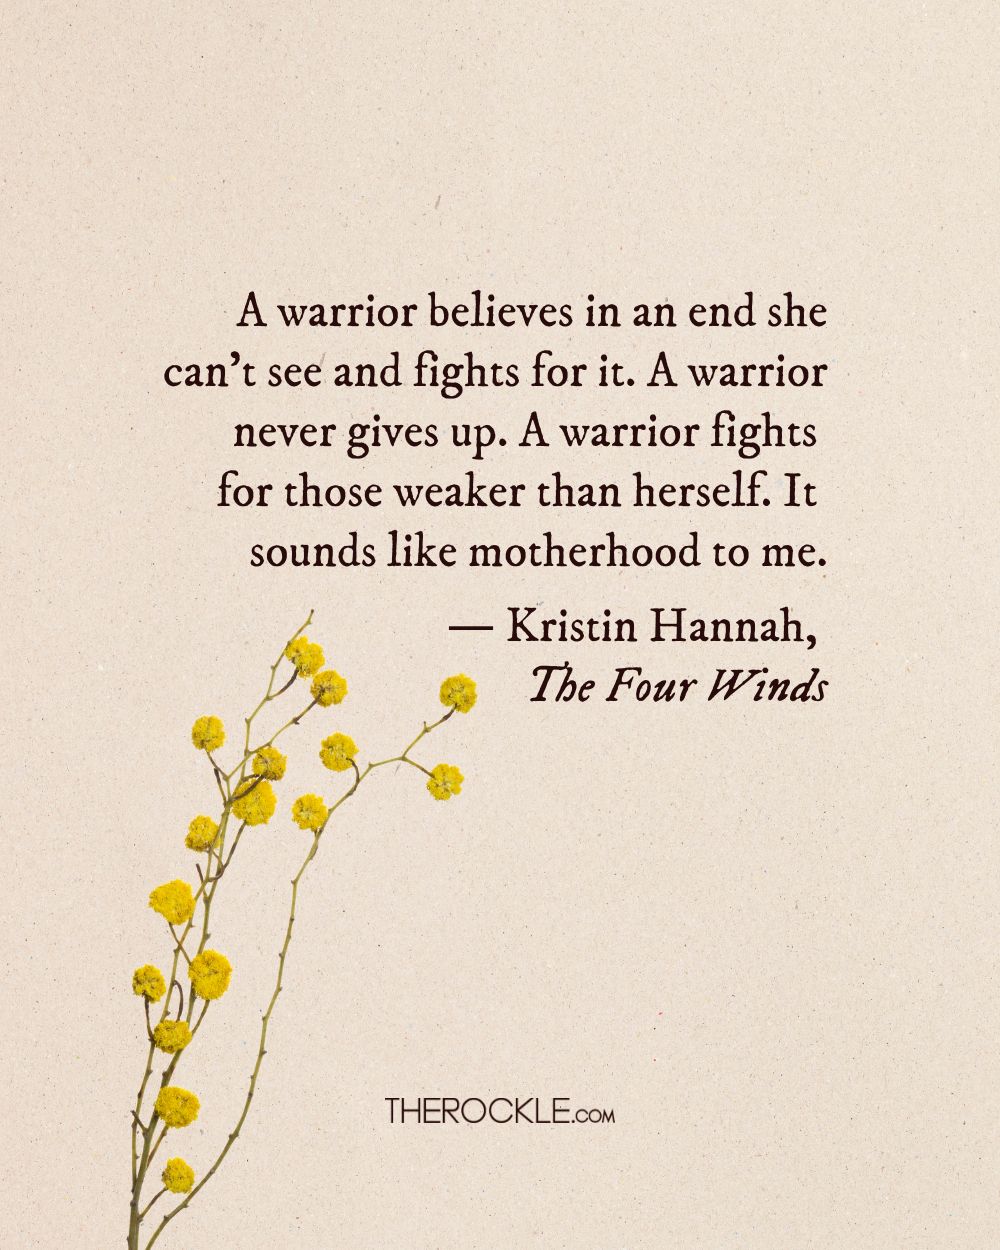 Kristin Hannah's quote about motherhood